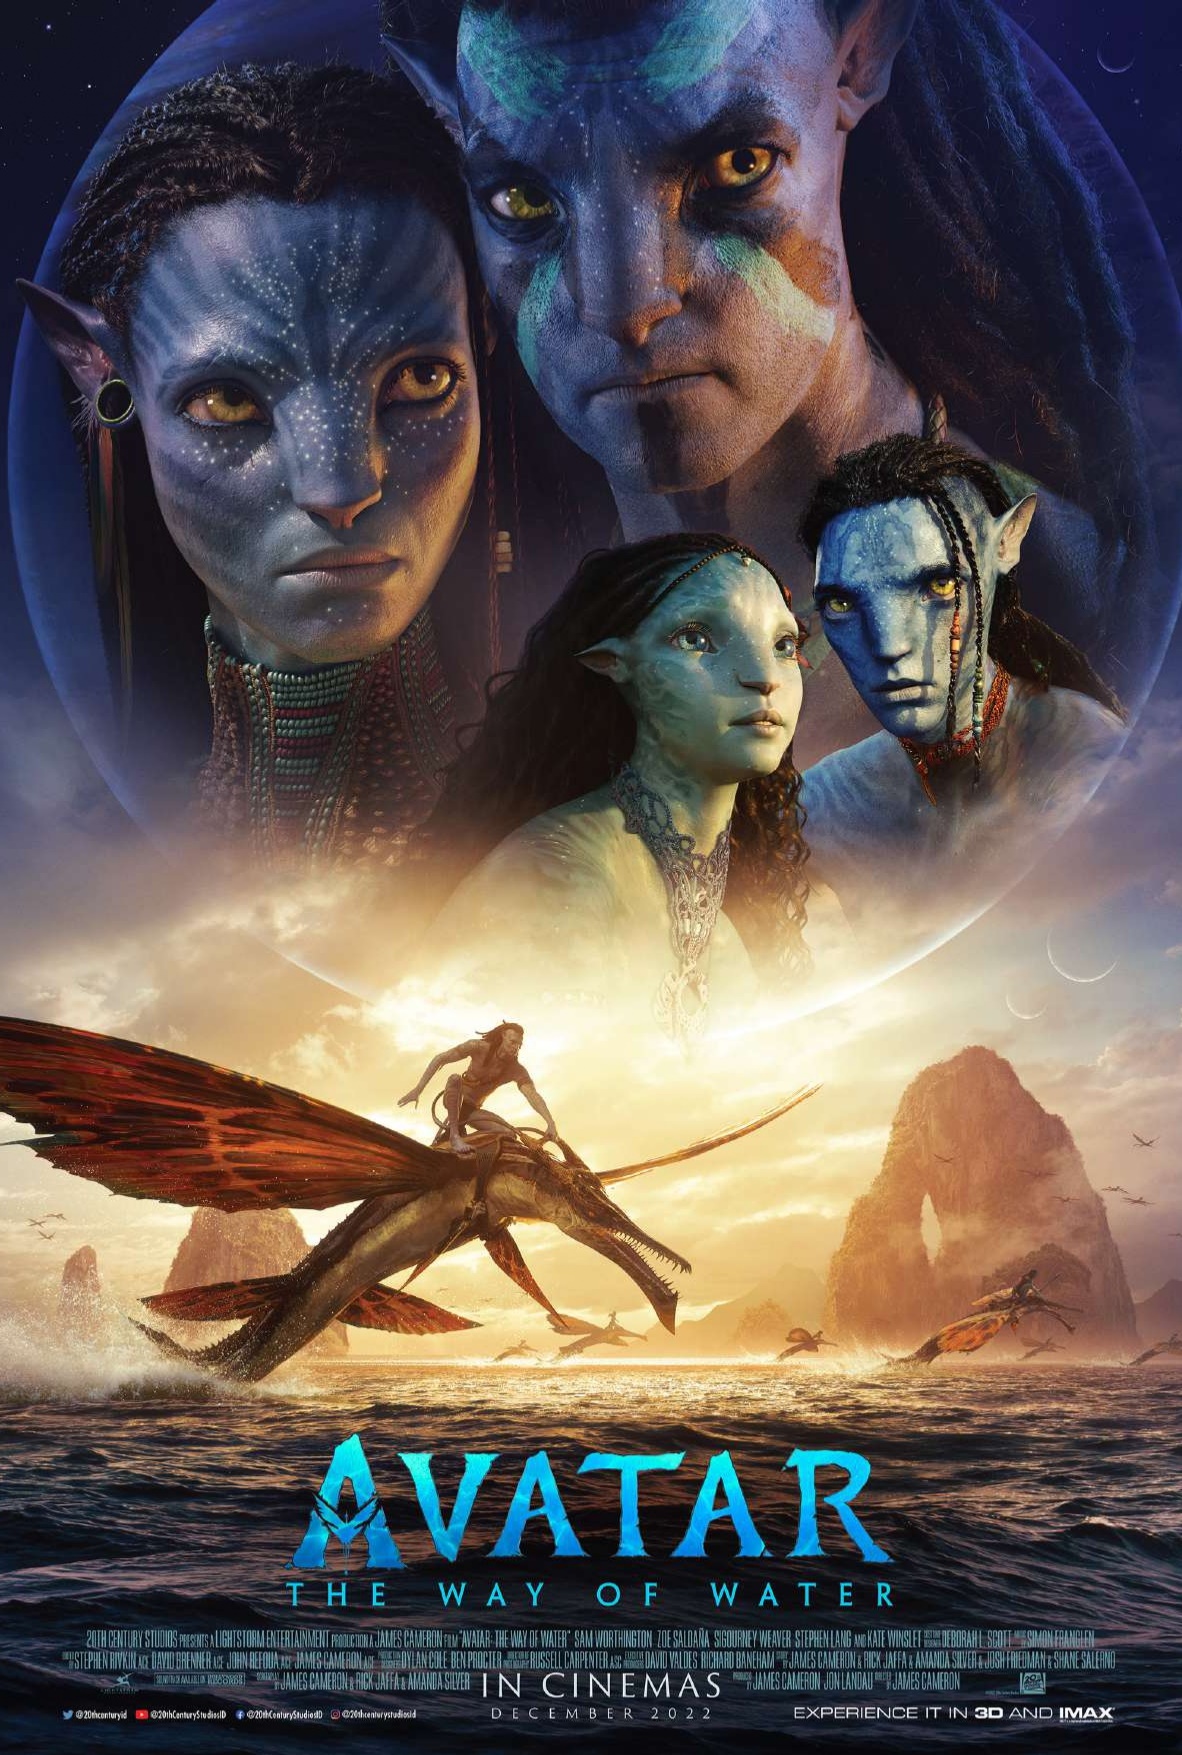 Avatar: The Way of Water Special Effects